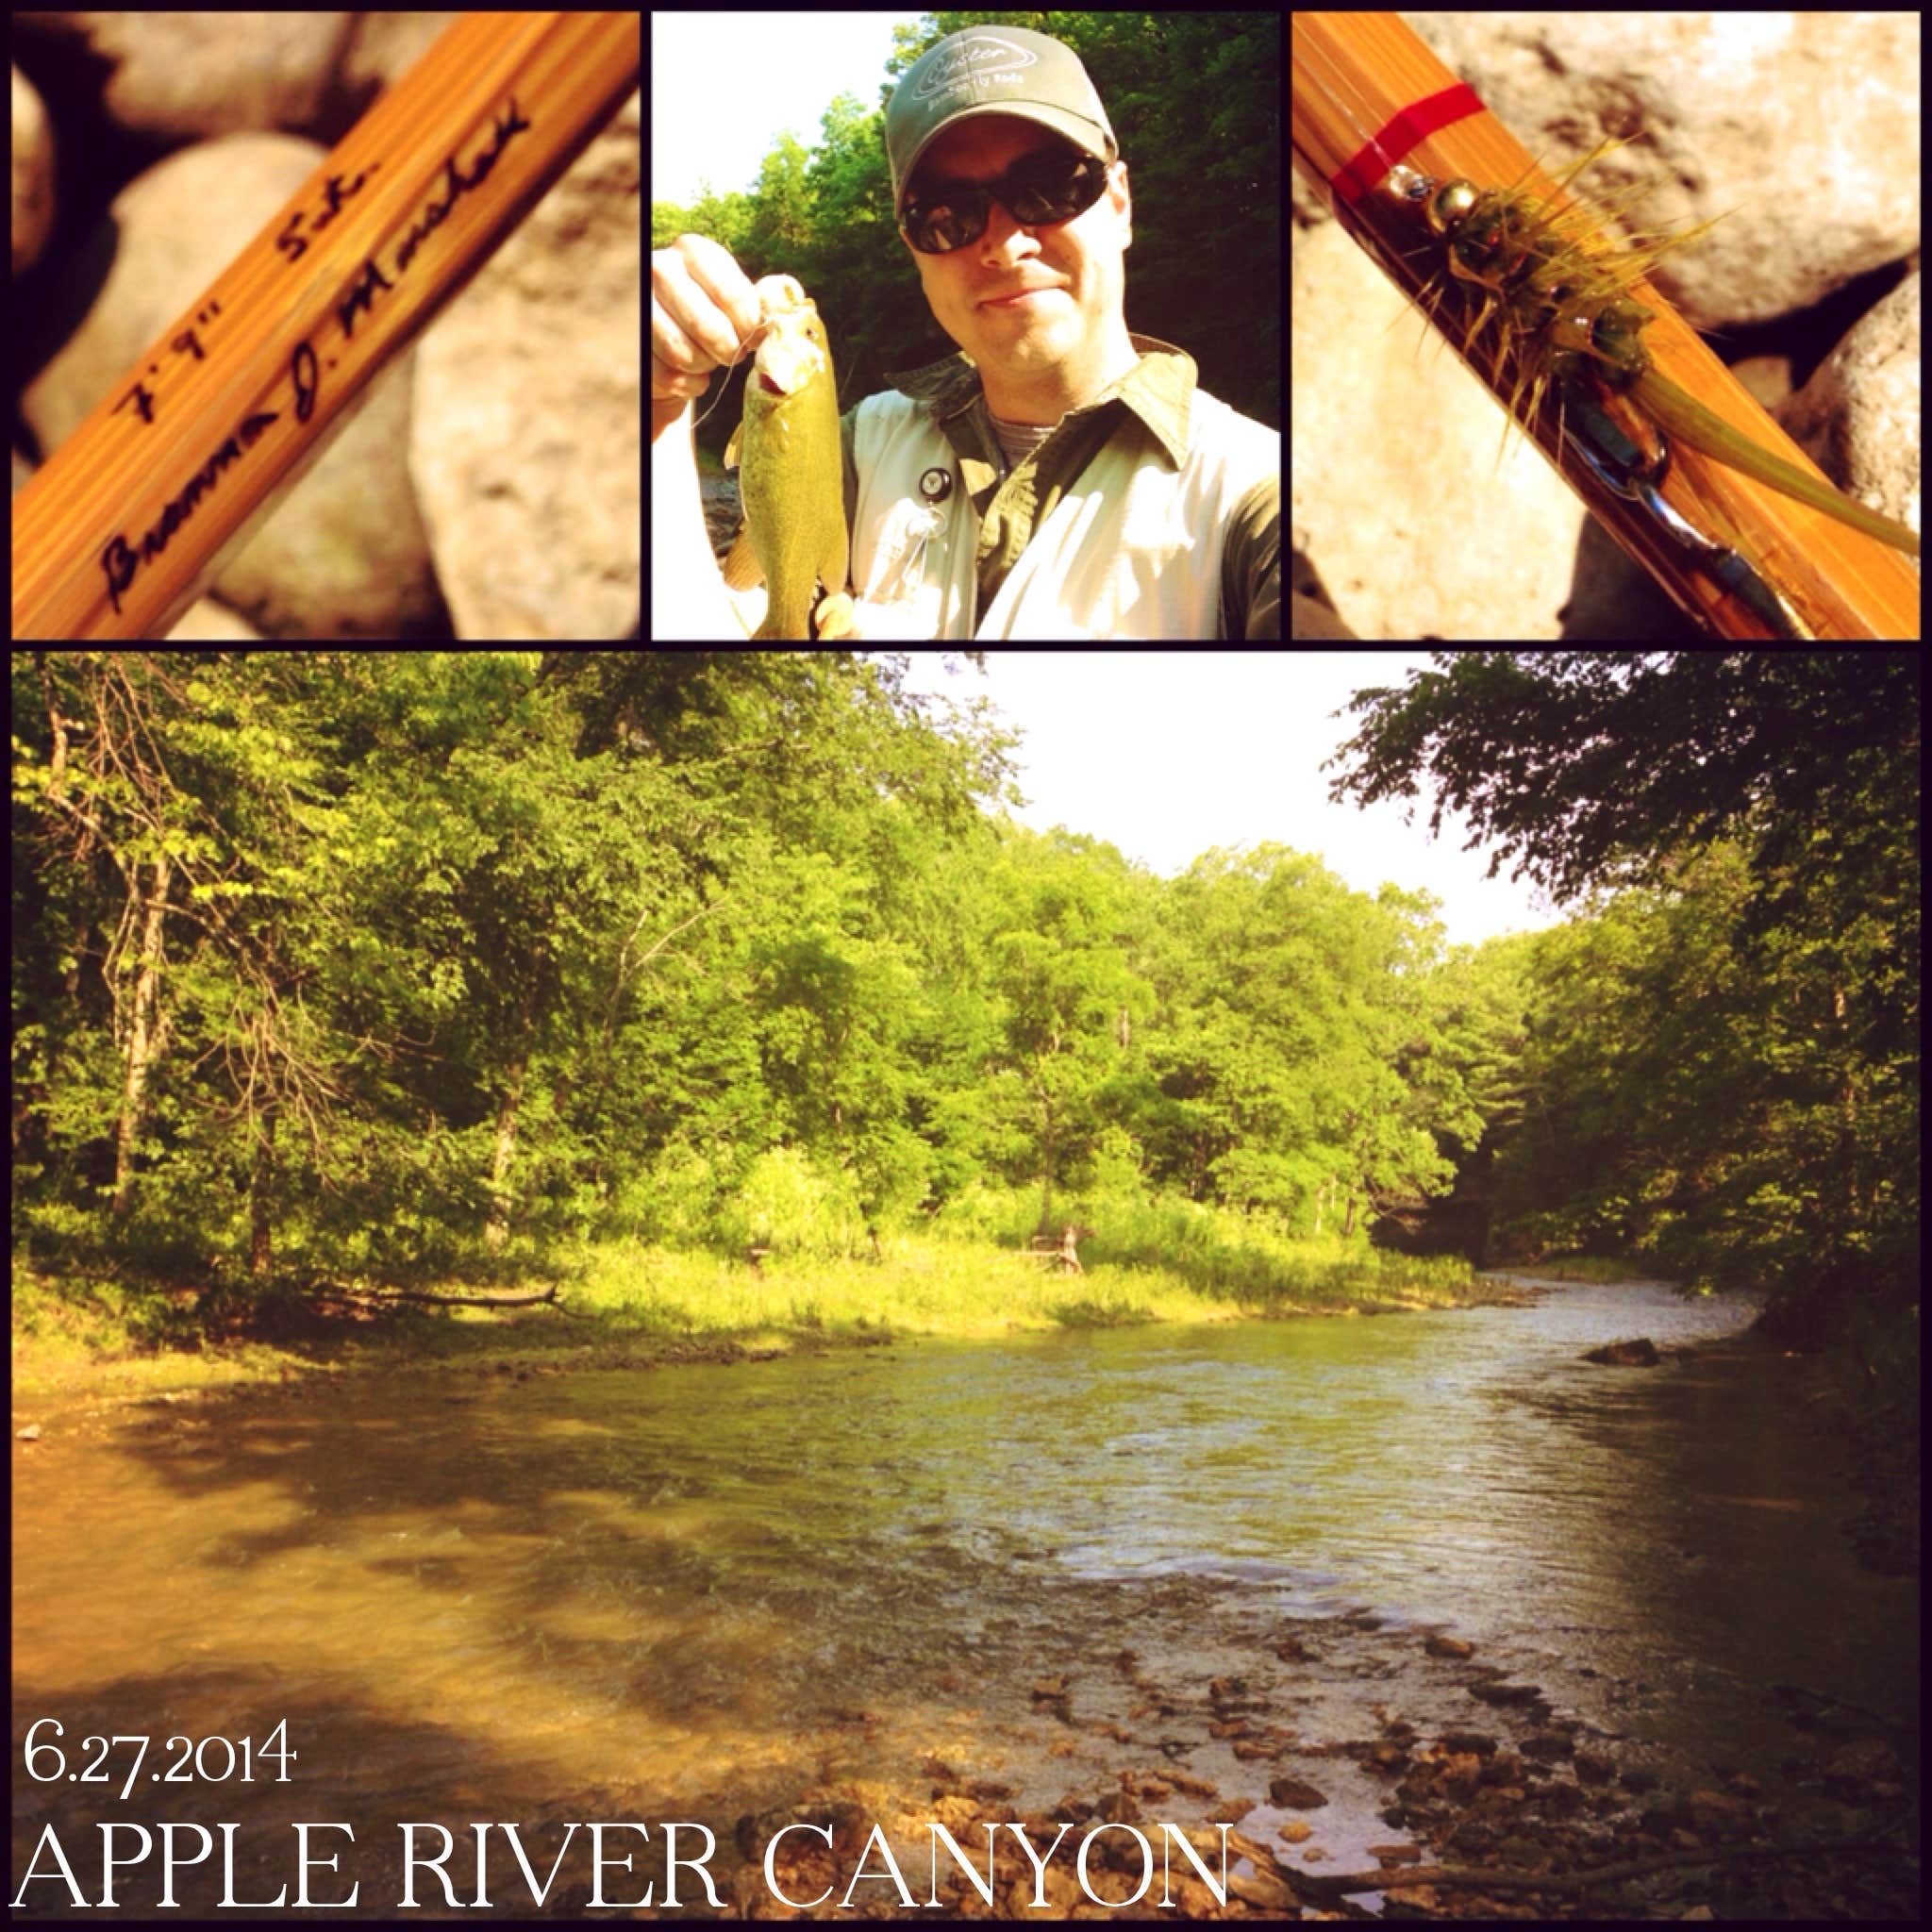 Camper submitted image from Apple River Canyon - 3